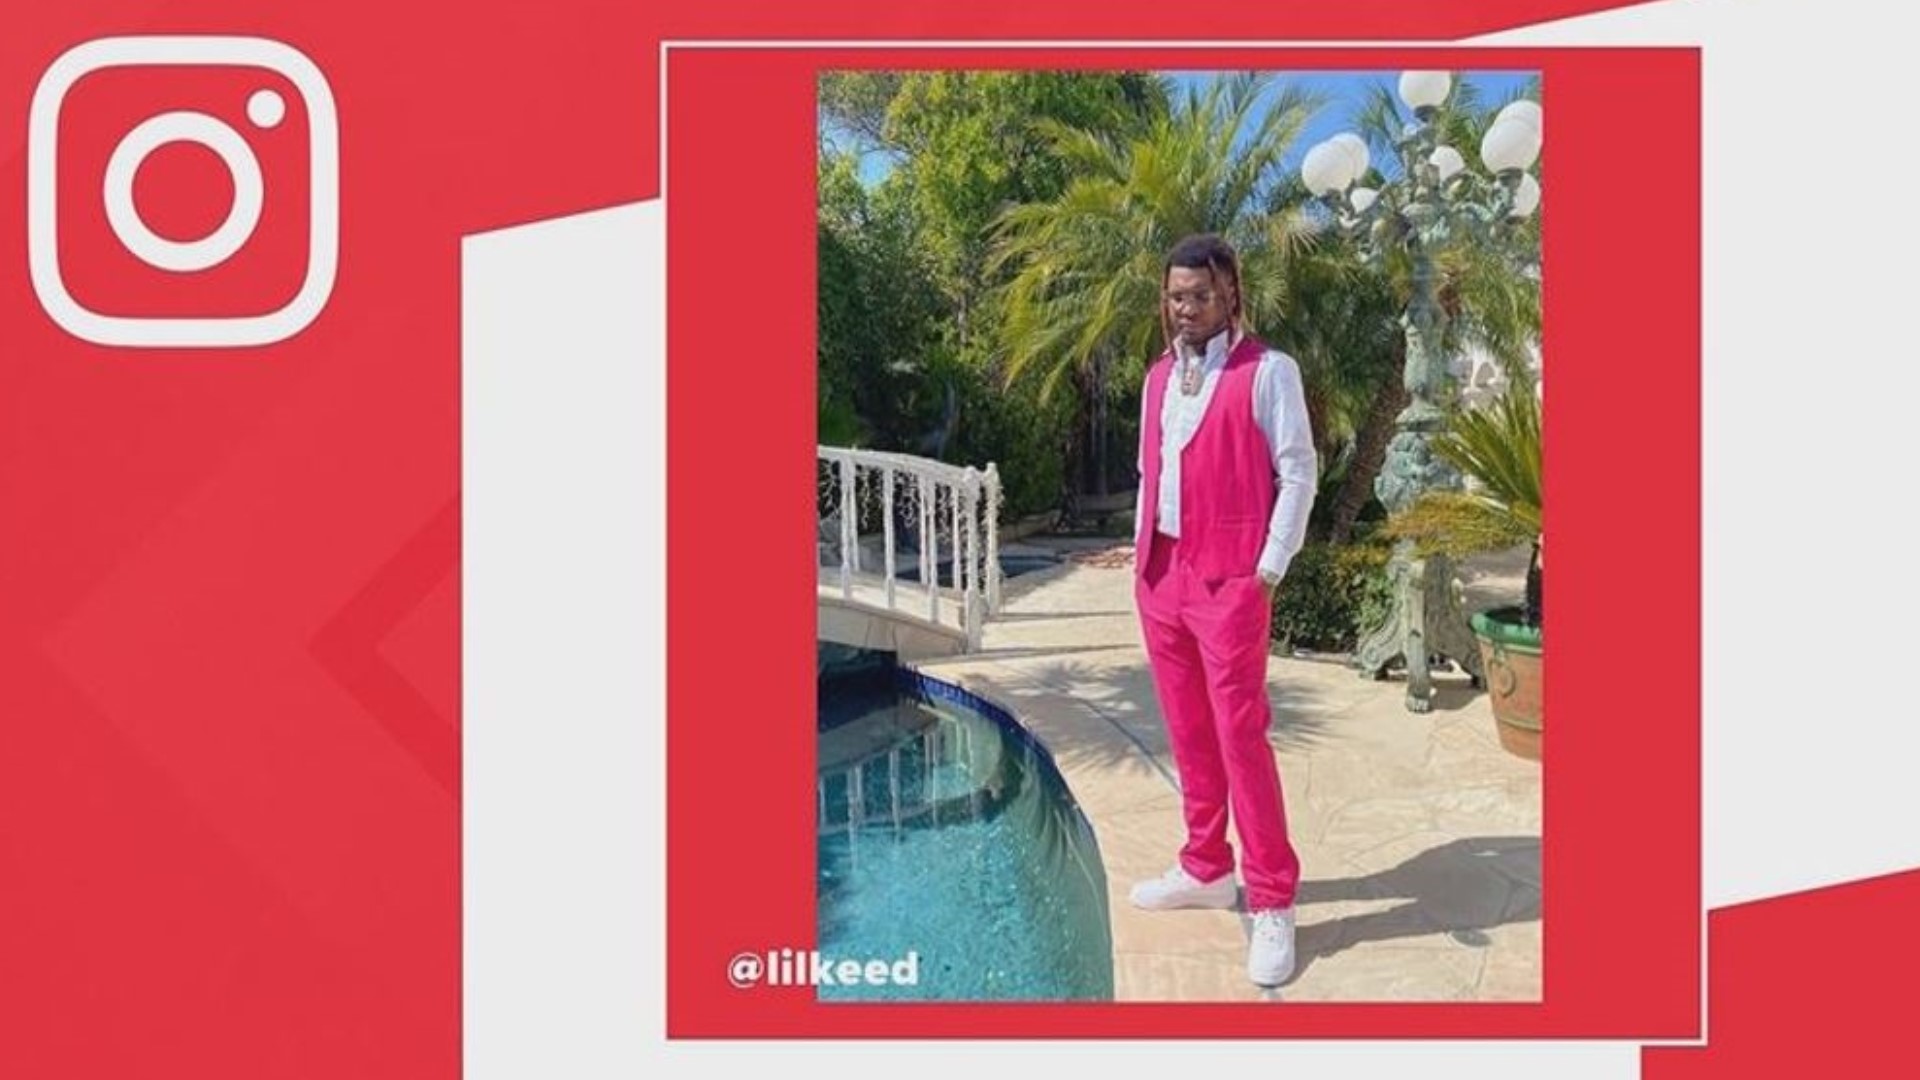 Lil Keed was signed to Young Thug's YSL record label. It was not immediately clear how he died.